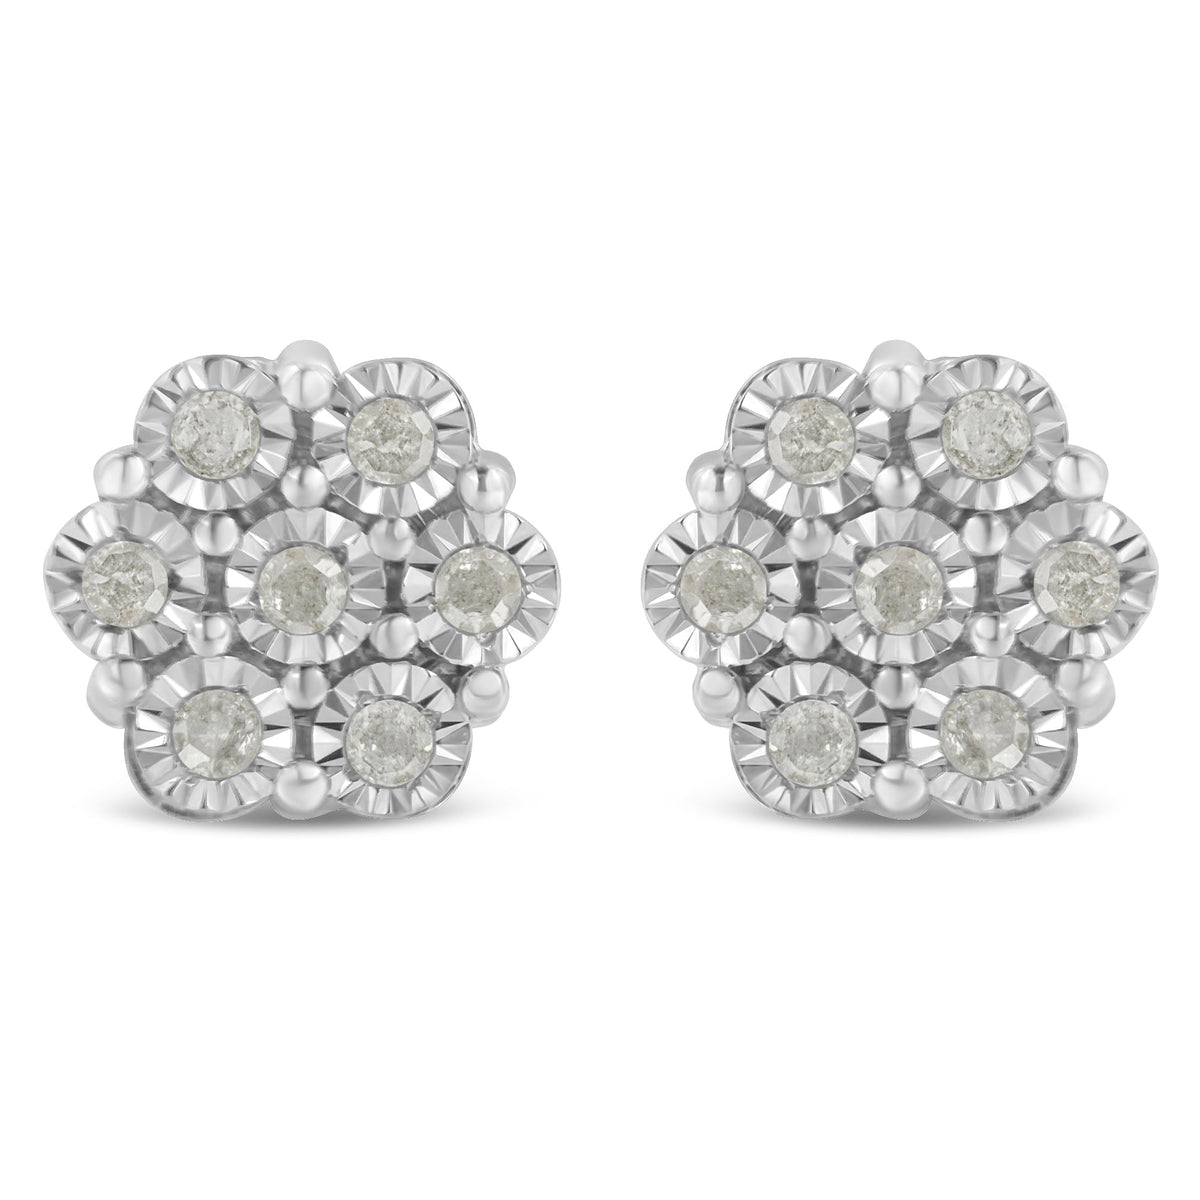 .925 Sterling Silver 1/2 Cttw Round-Cut Diamond Miracle-Set Floral Cluster Button Stud Earrings (I-J Color, I2-I3 Clarity) - LinkagejewelrydesignLinkagejewelrydesign